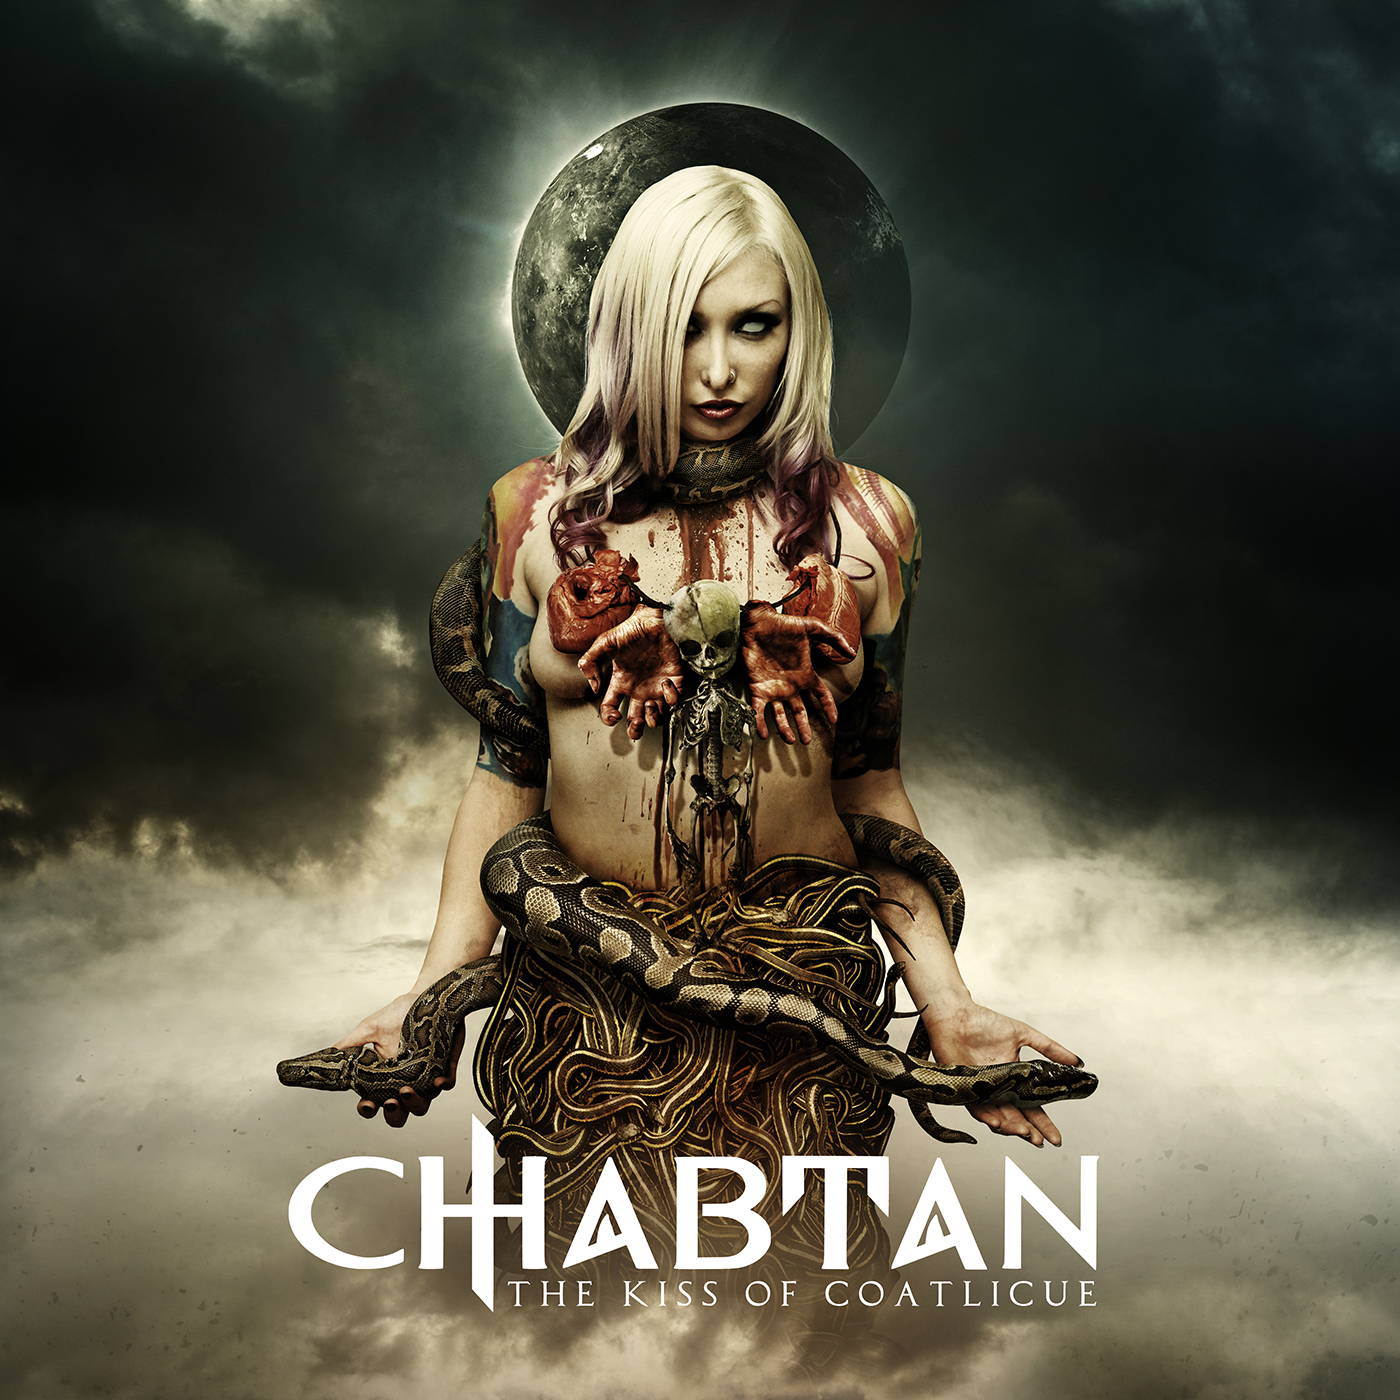 Chabtan – The Kiss of Coaticue Review